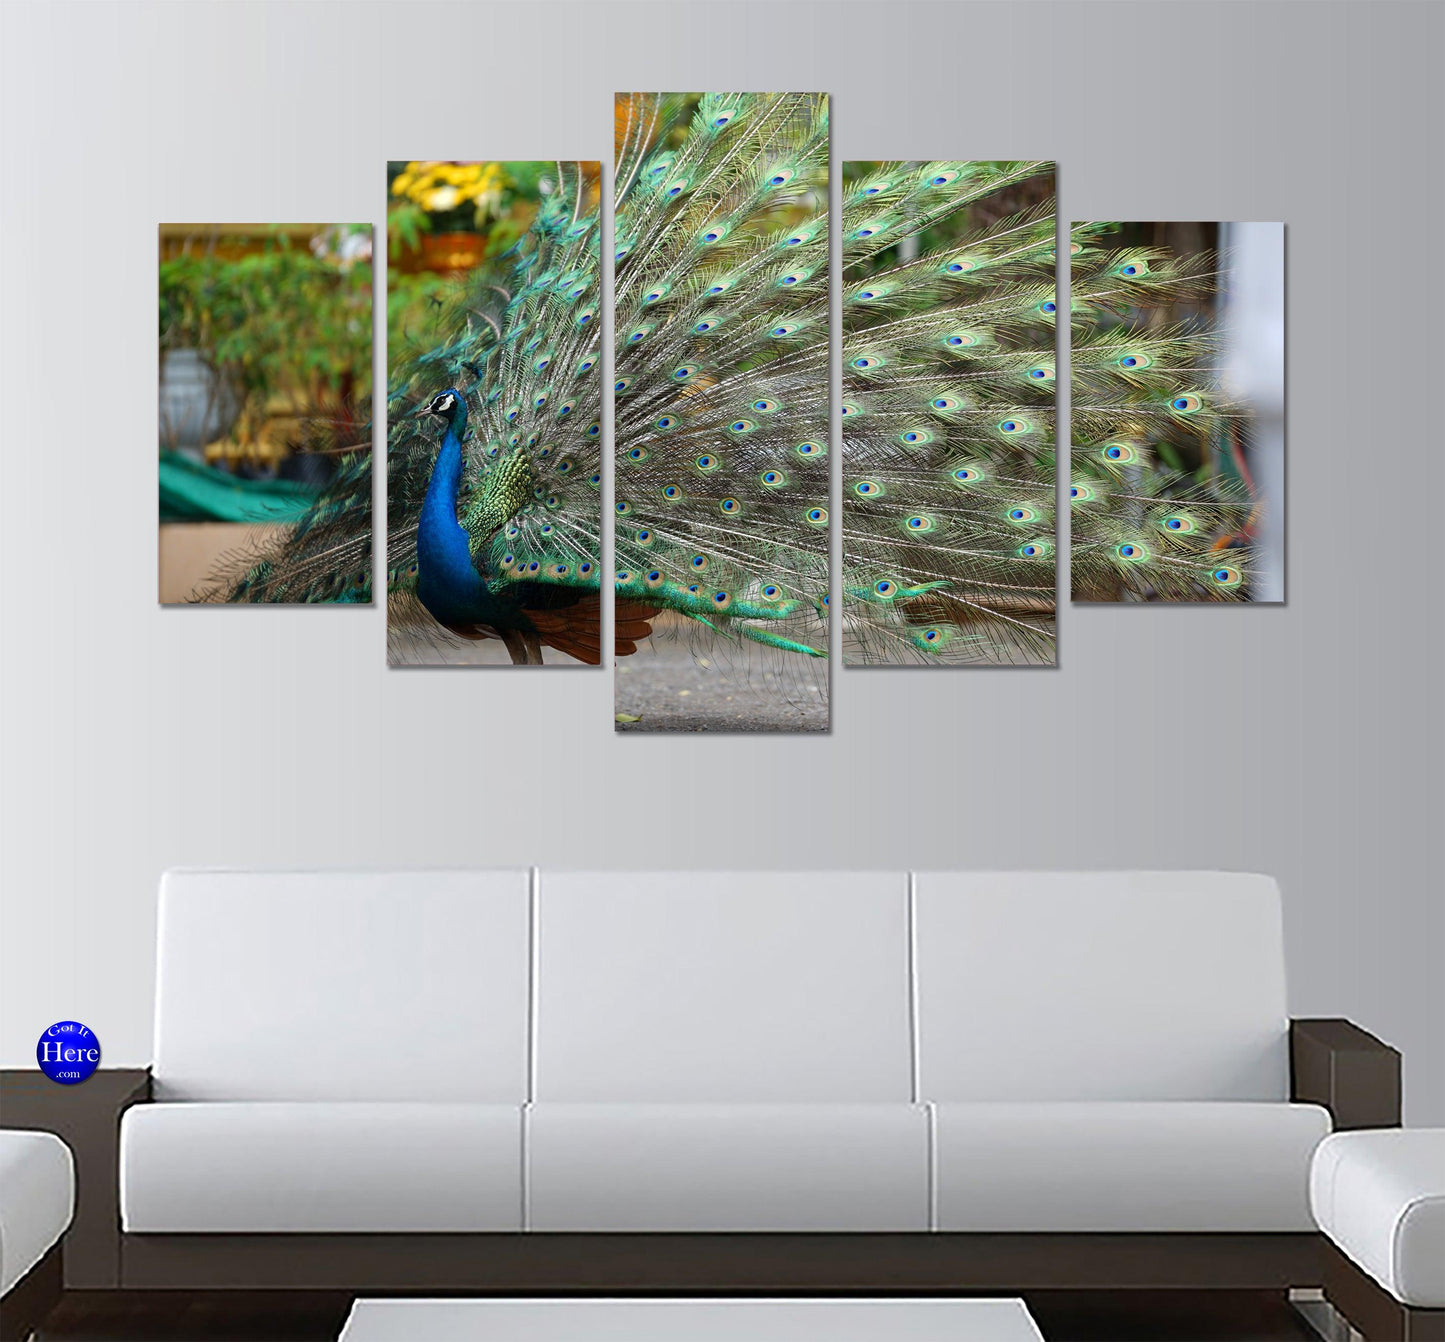 Peacock In Full Display 5 Panel Canvas Print Wall Art - GotItHere.com